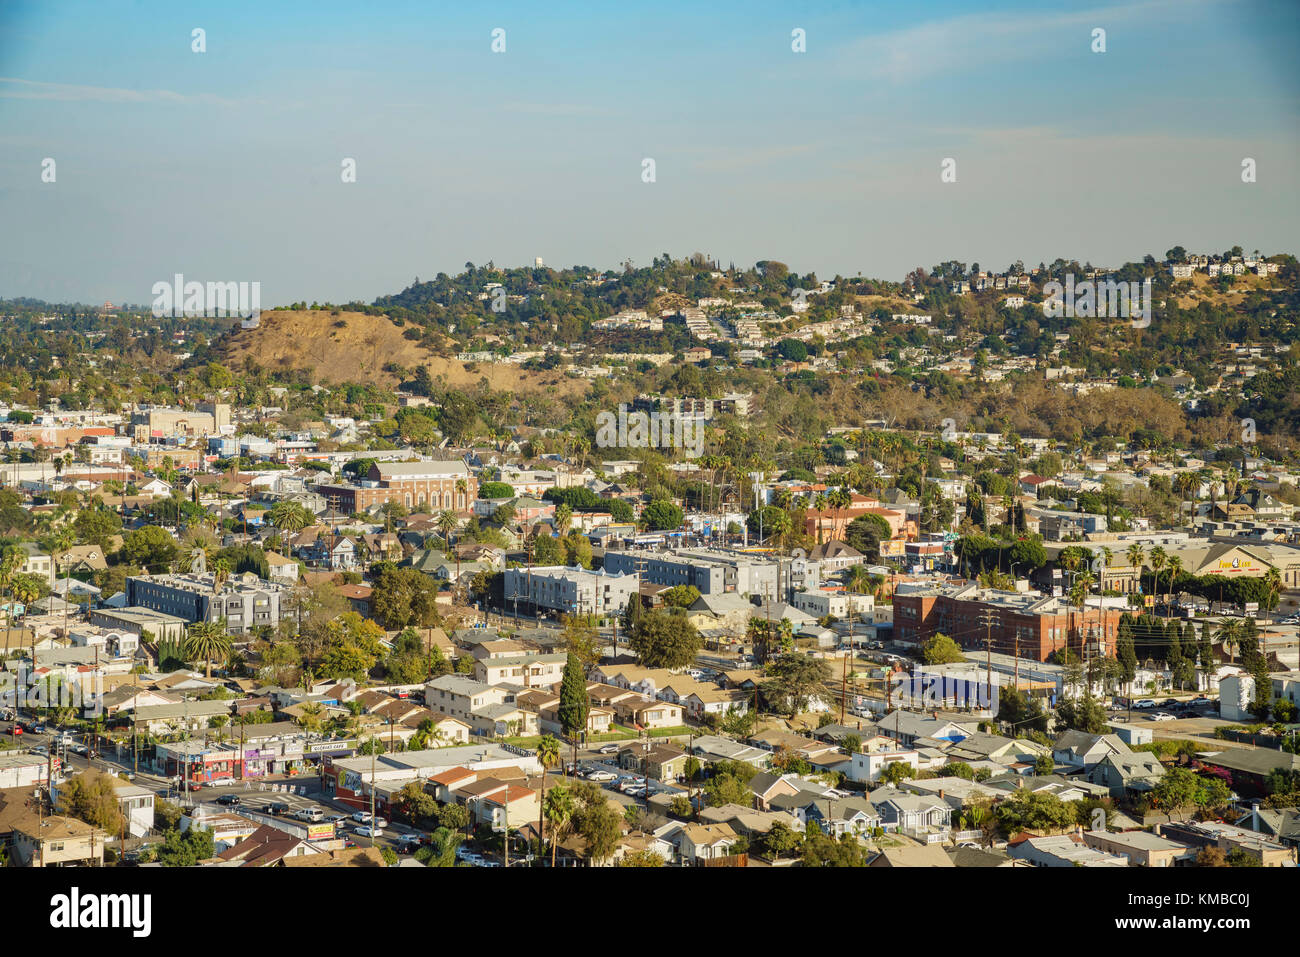 Aerial view of the cityscape of Highland Park, Los Angeles, California, United States Stock Photo